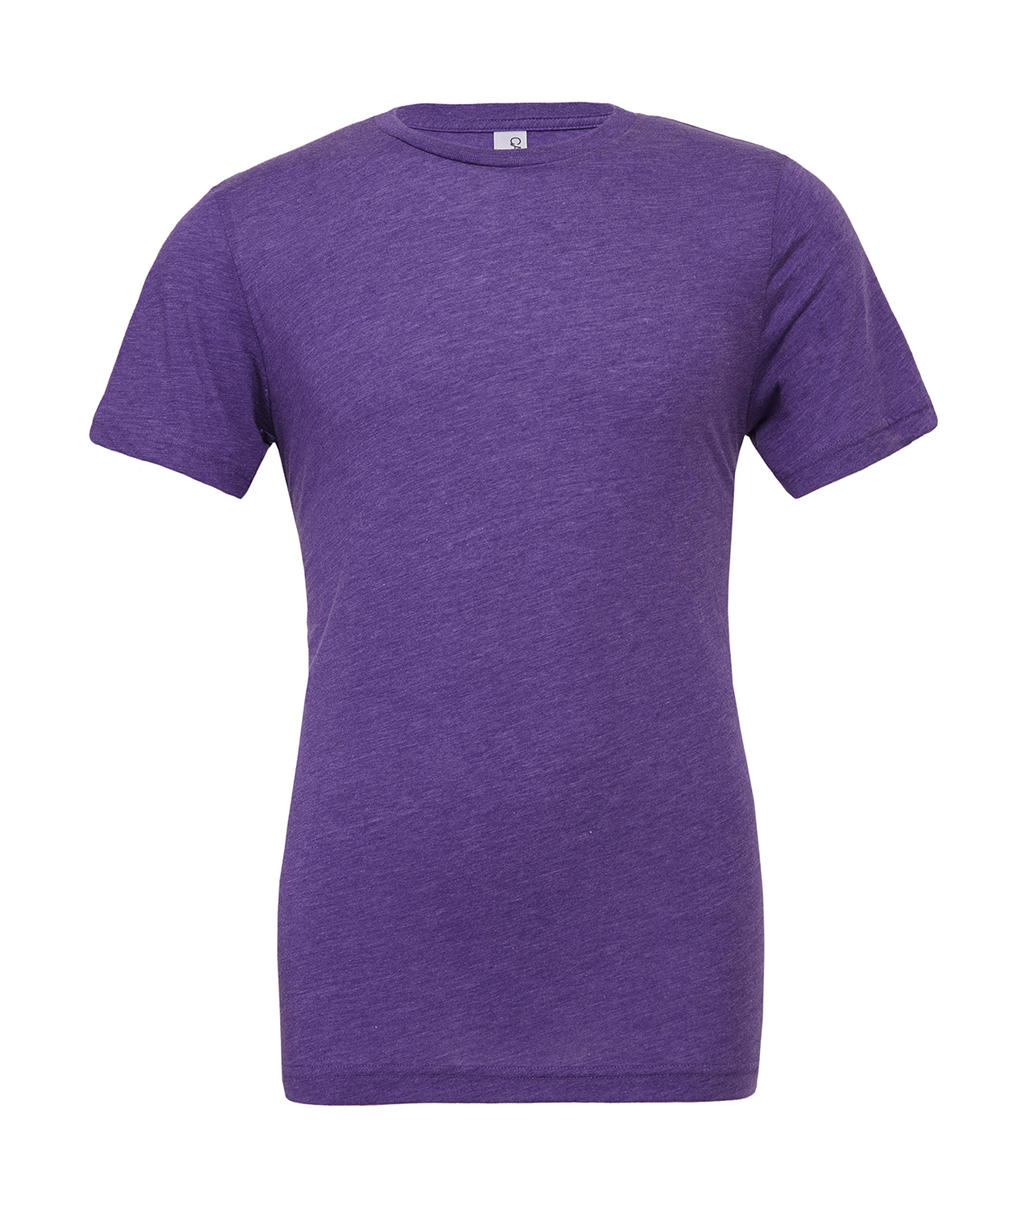  Unisex Triblend Short Sleeve Tee in Farbe Purple Triblend